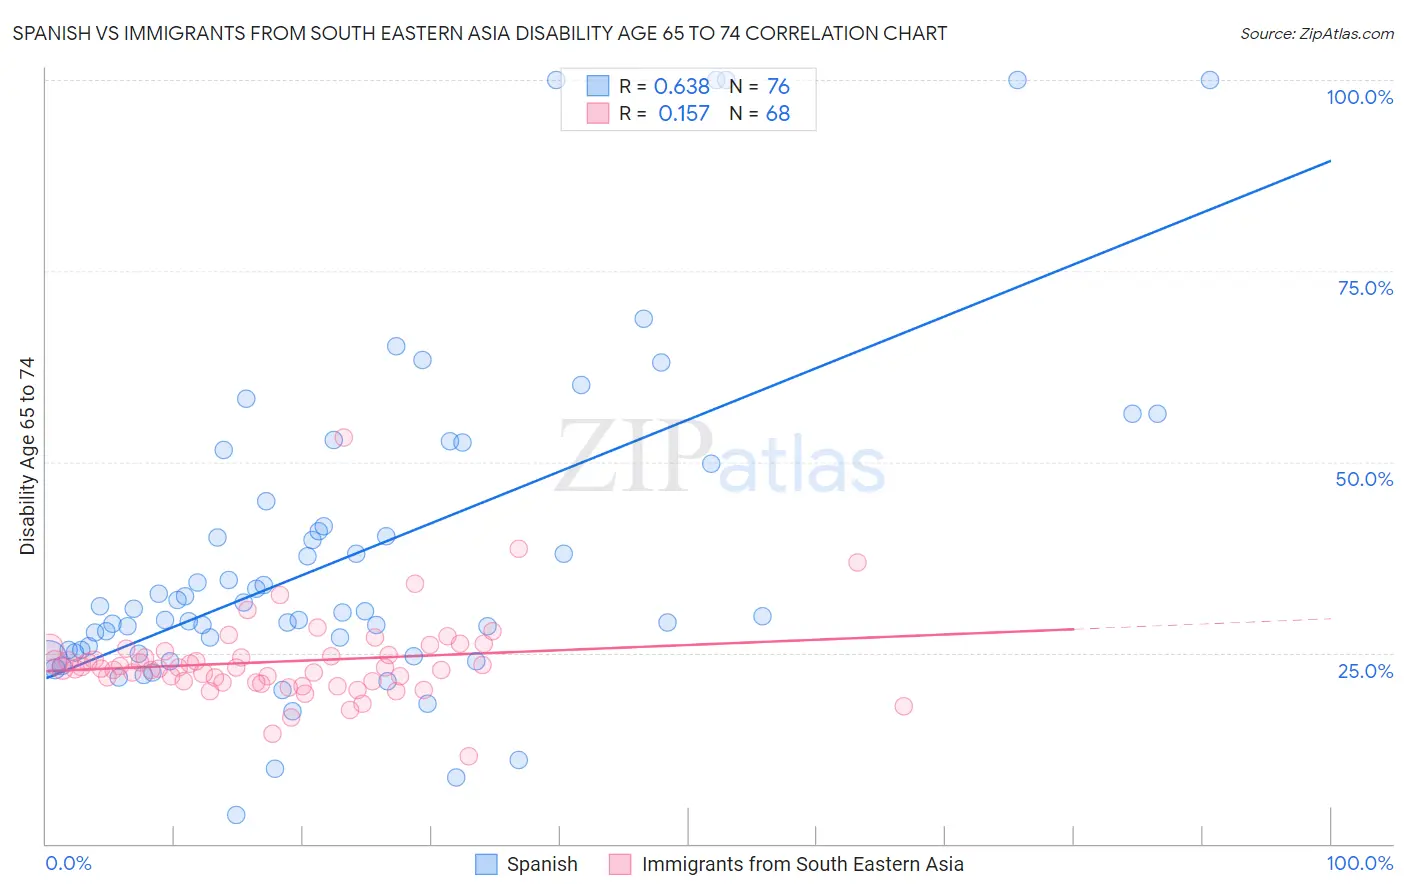 Spanish vs Immigrants from South Eastern Asia Disability Age 65 to 74